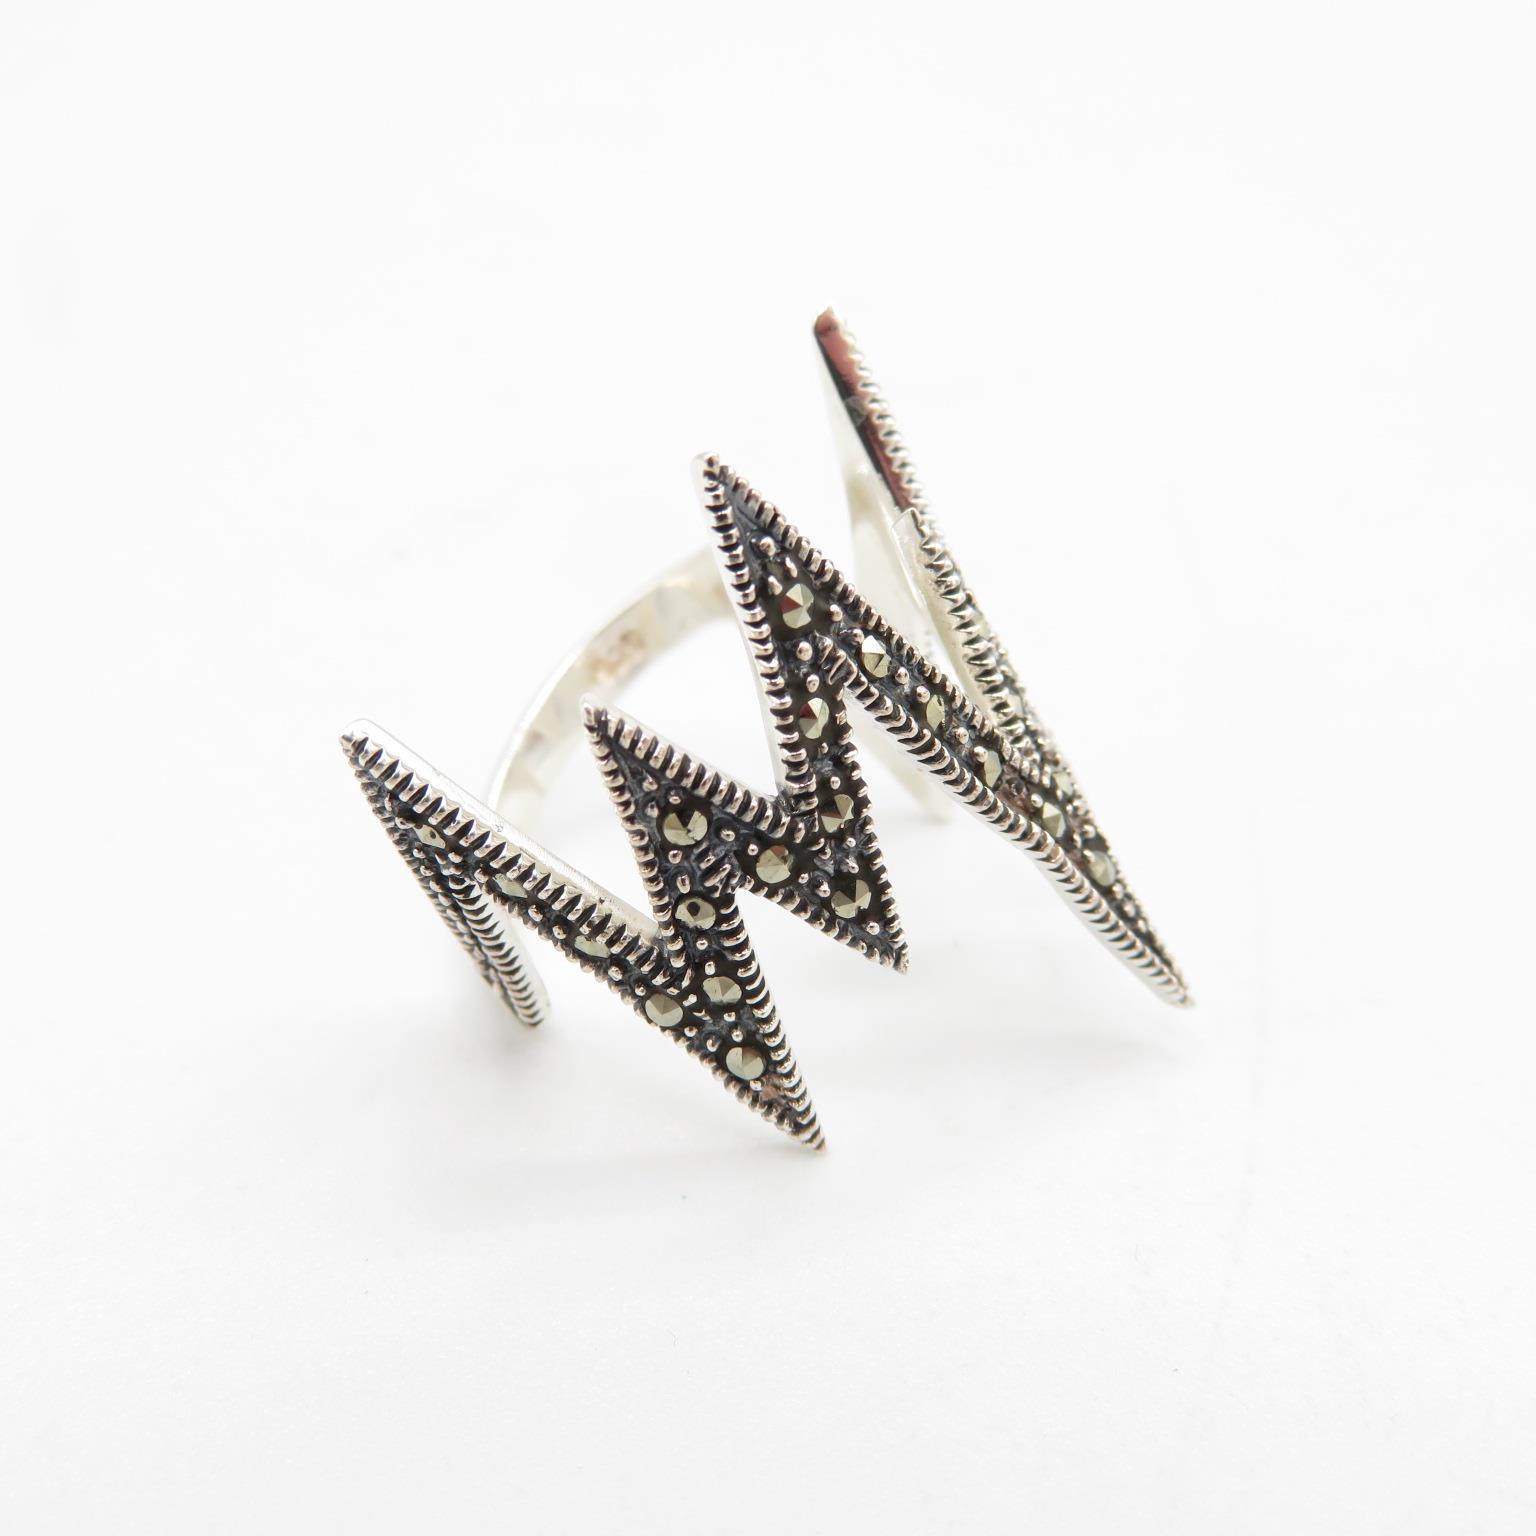 HM 925 Sterling Silver Zig Zag ring (5.1g) In excellent condition - Image 4 of 6